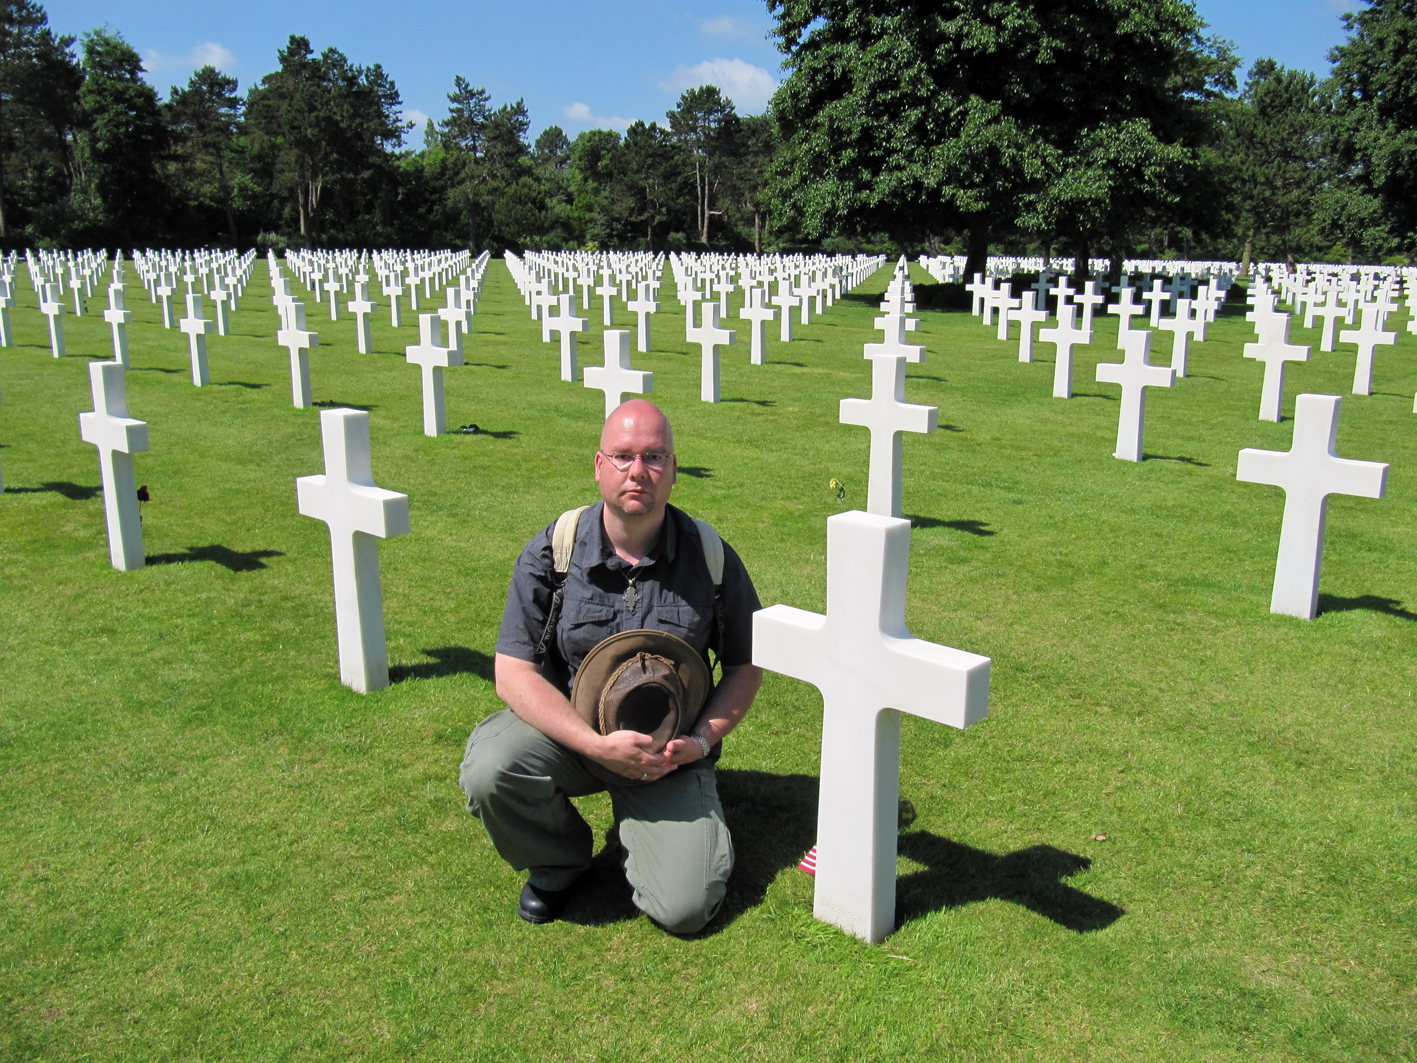 Me paying respect to the fallen at the Normandy American Cemetery and Memorial